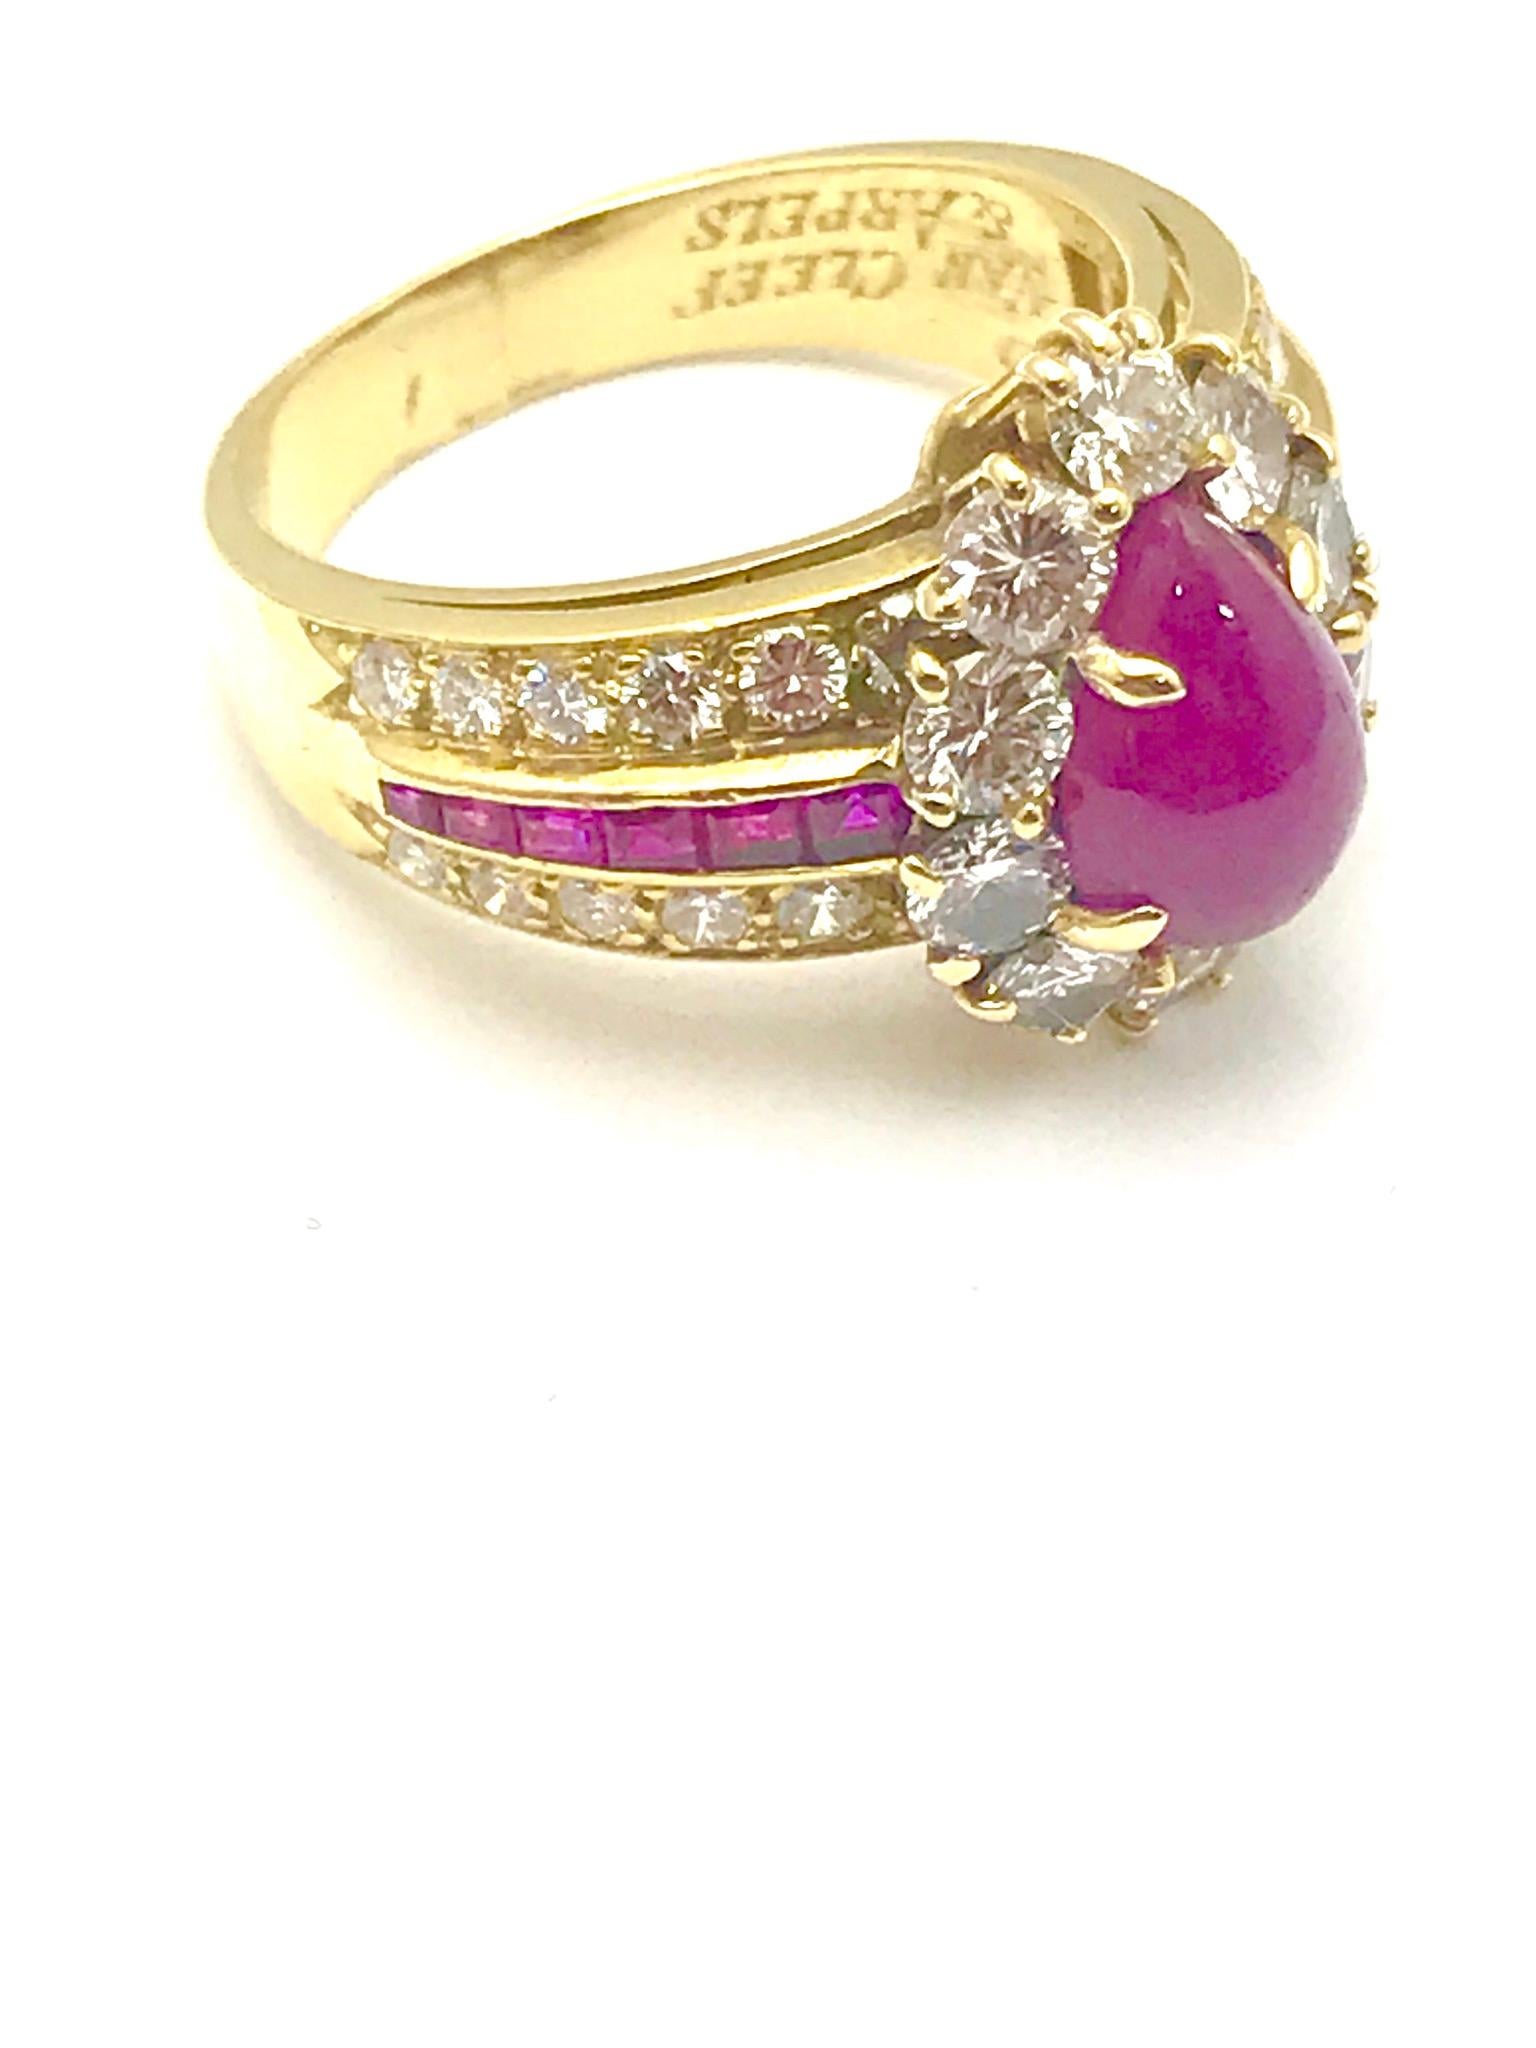 Revival Van Cleef & Arpels Cabochon Ruby and Diamond Yellow Gold Ring